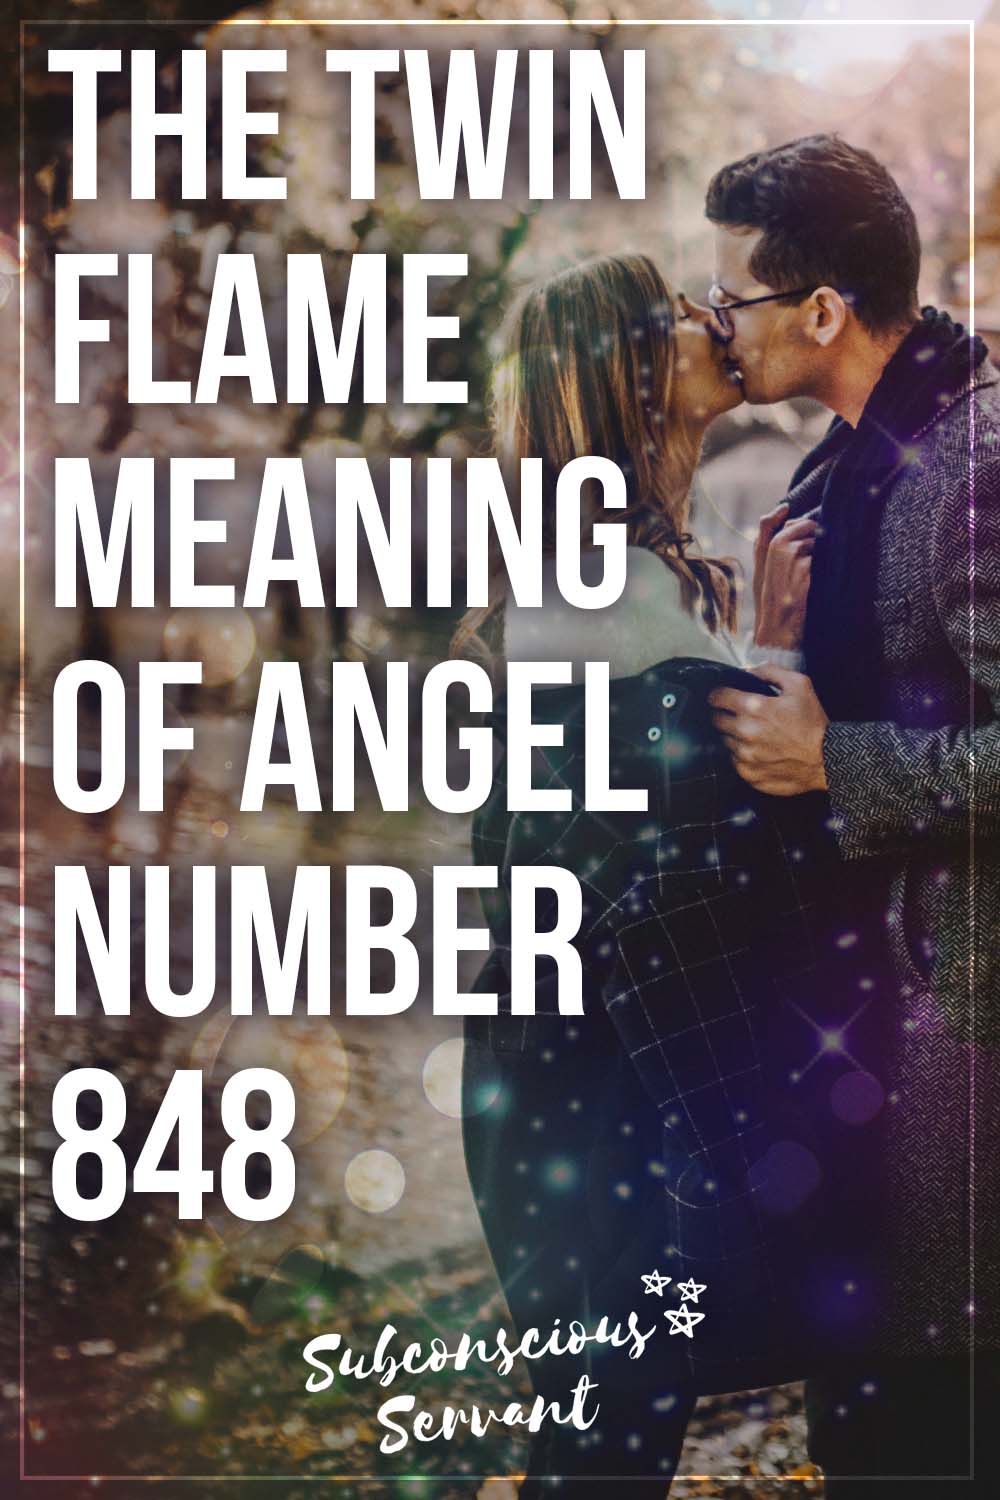 The Unique Twin Flame Meaning Of Angel Number 848